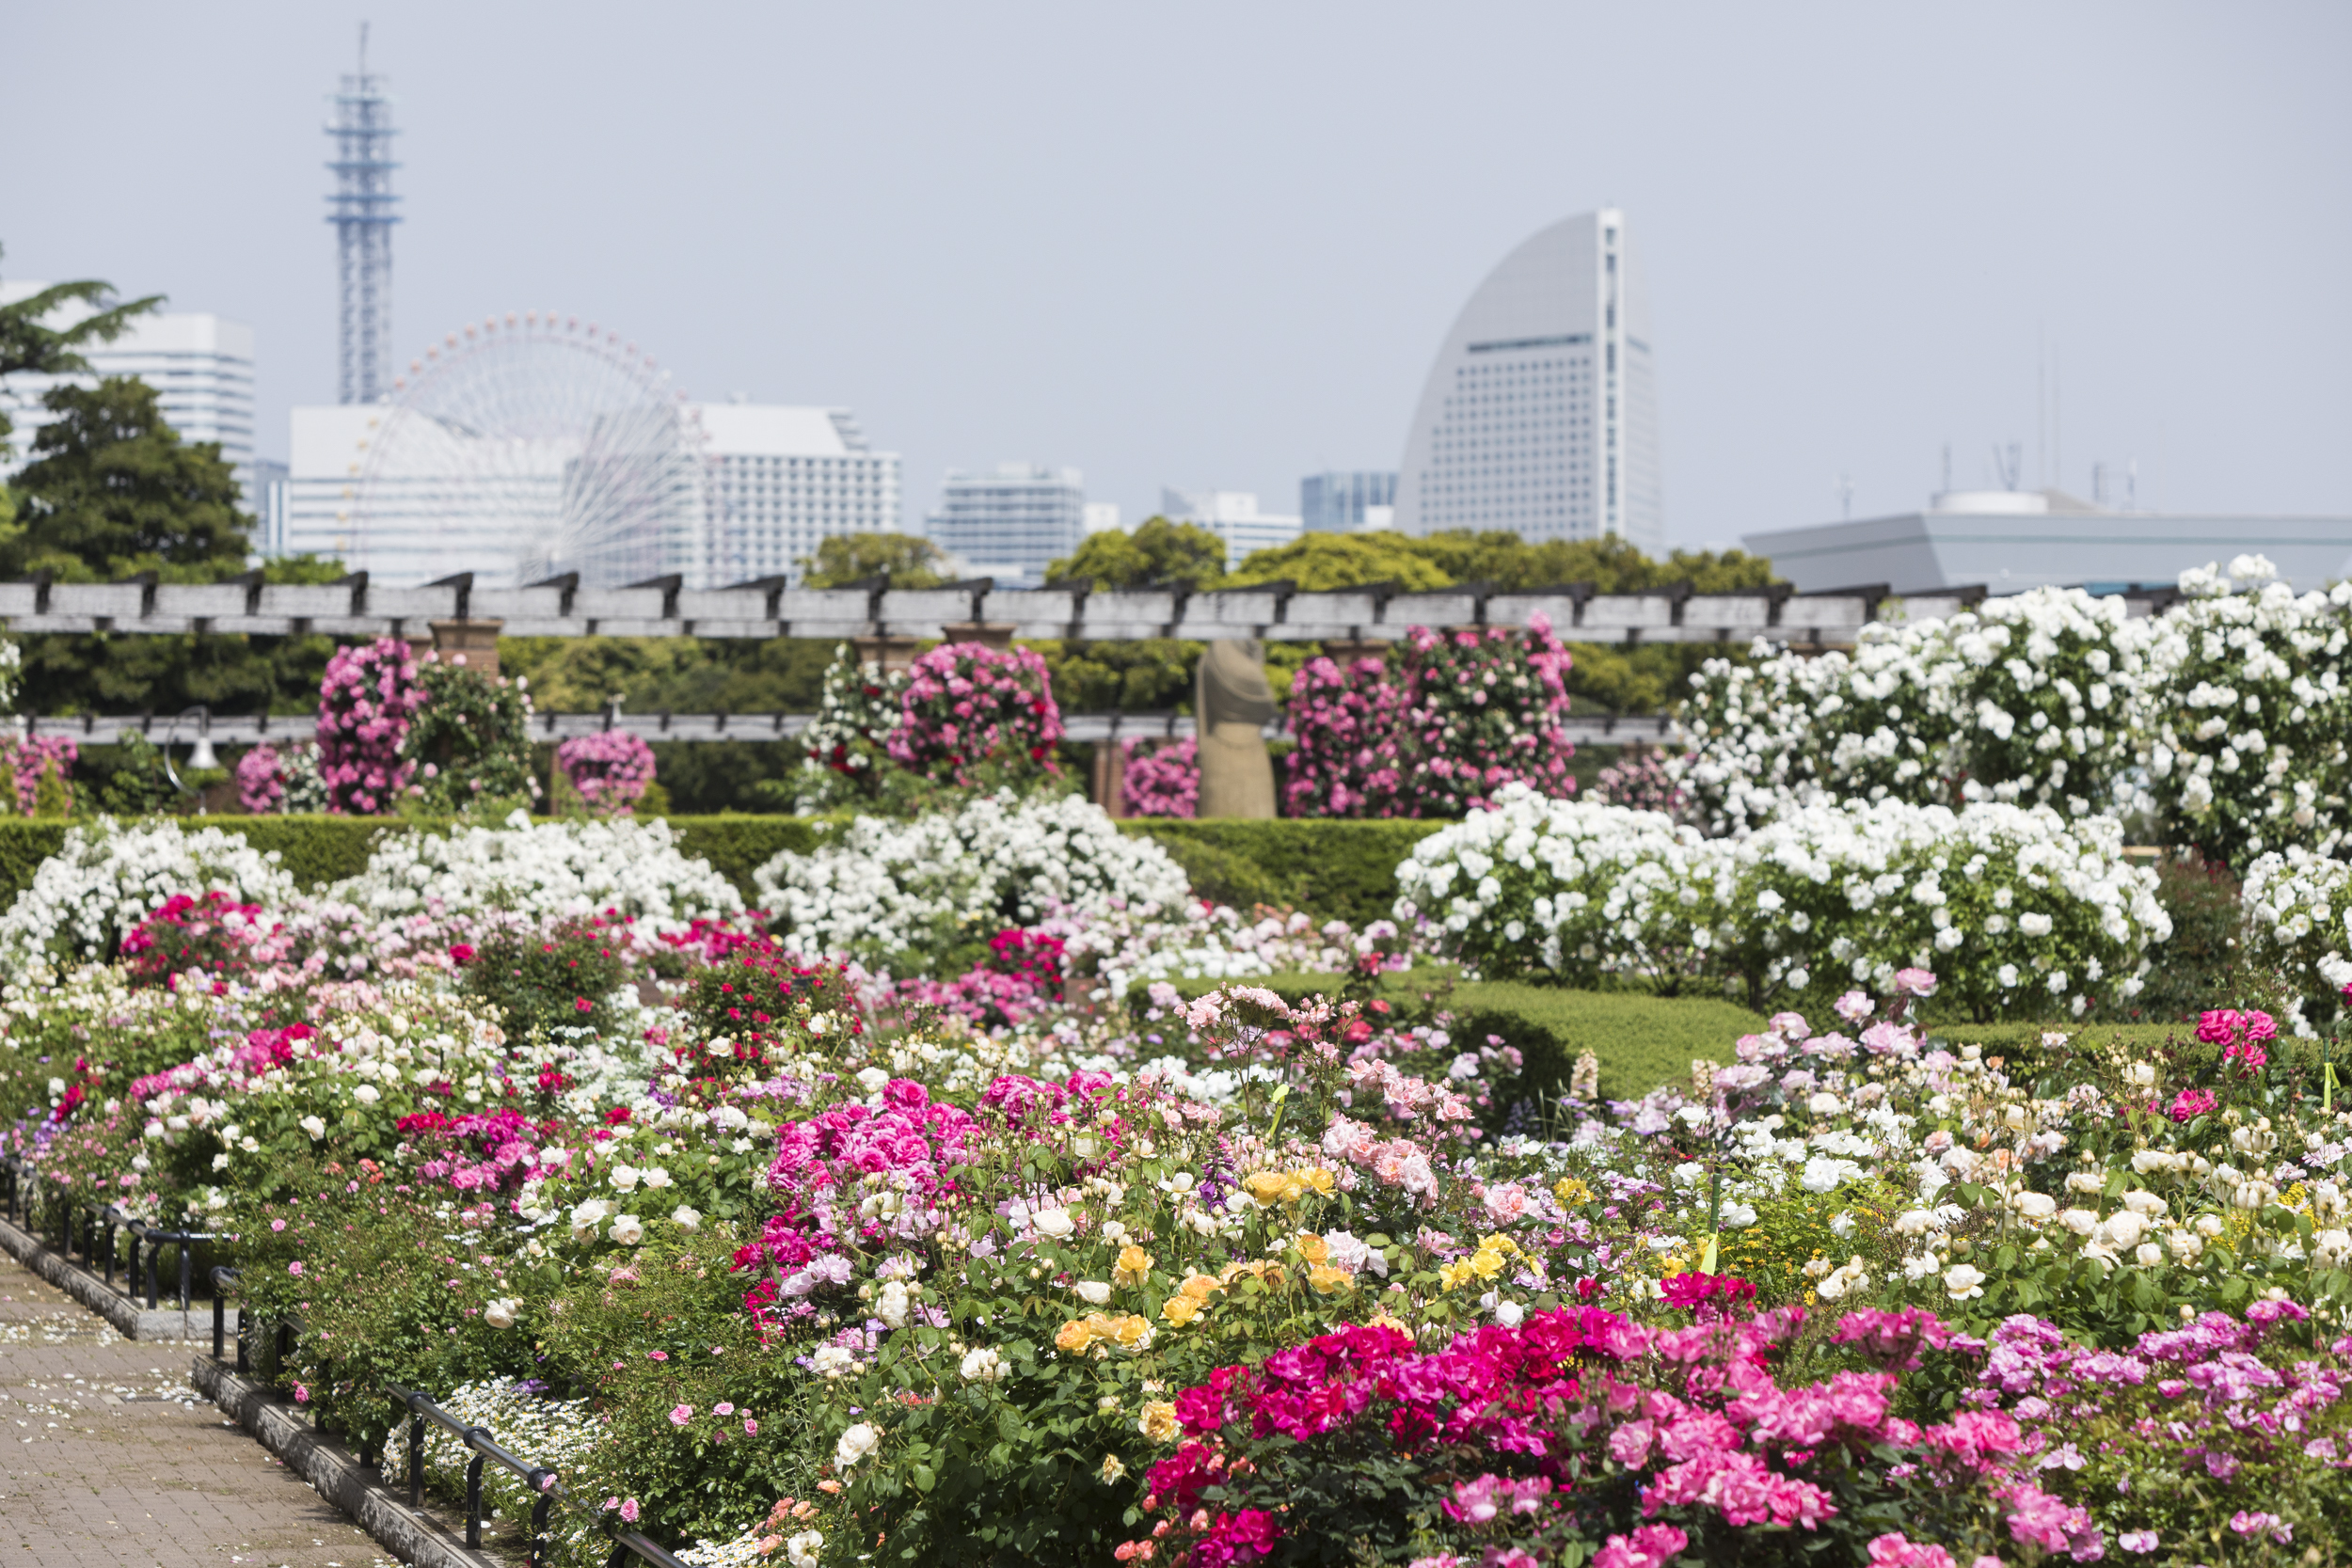 See All The Spring Flowers In Bloom At Garden Necklace Yokohama For Free